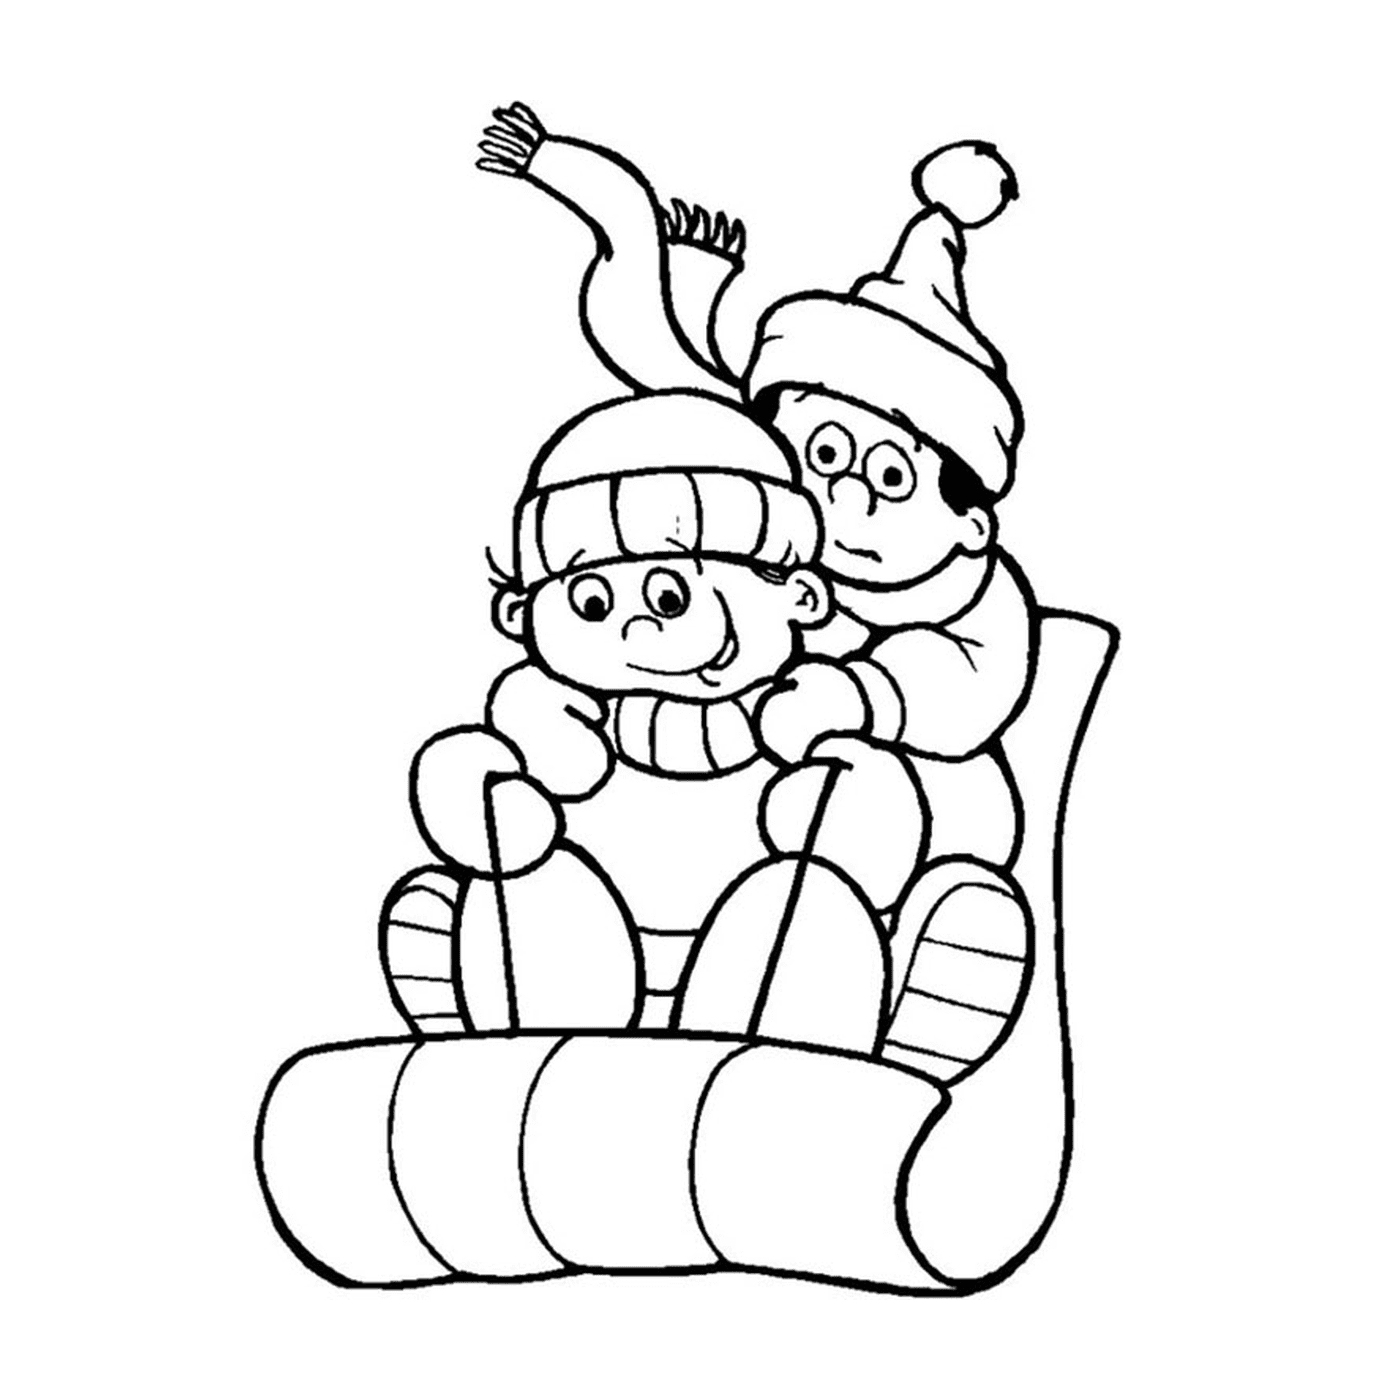  Two people do tobogganing together 